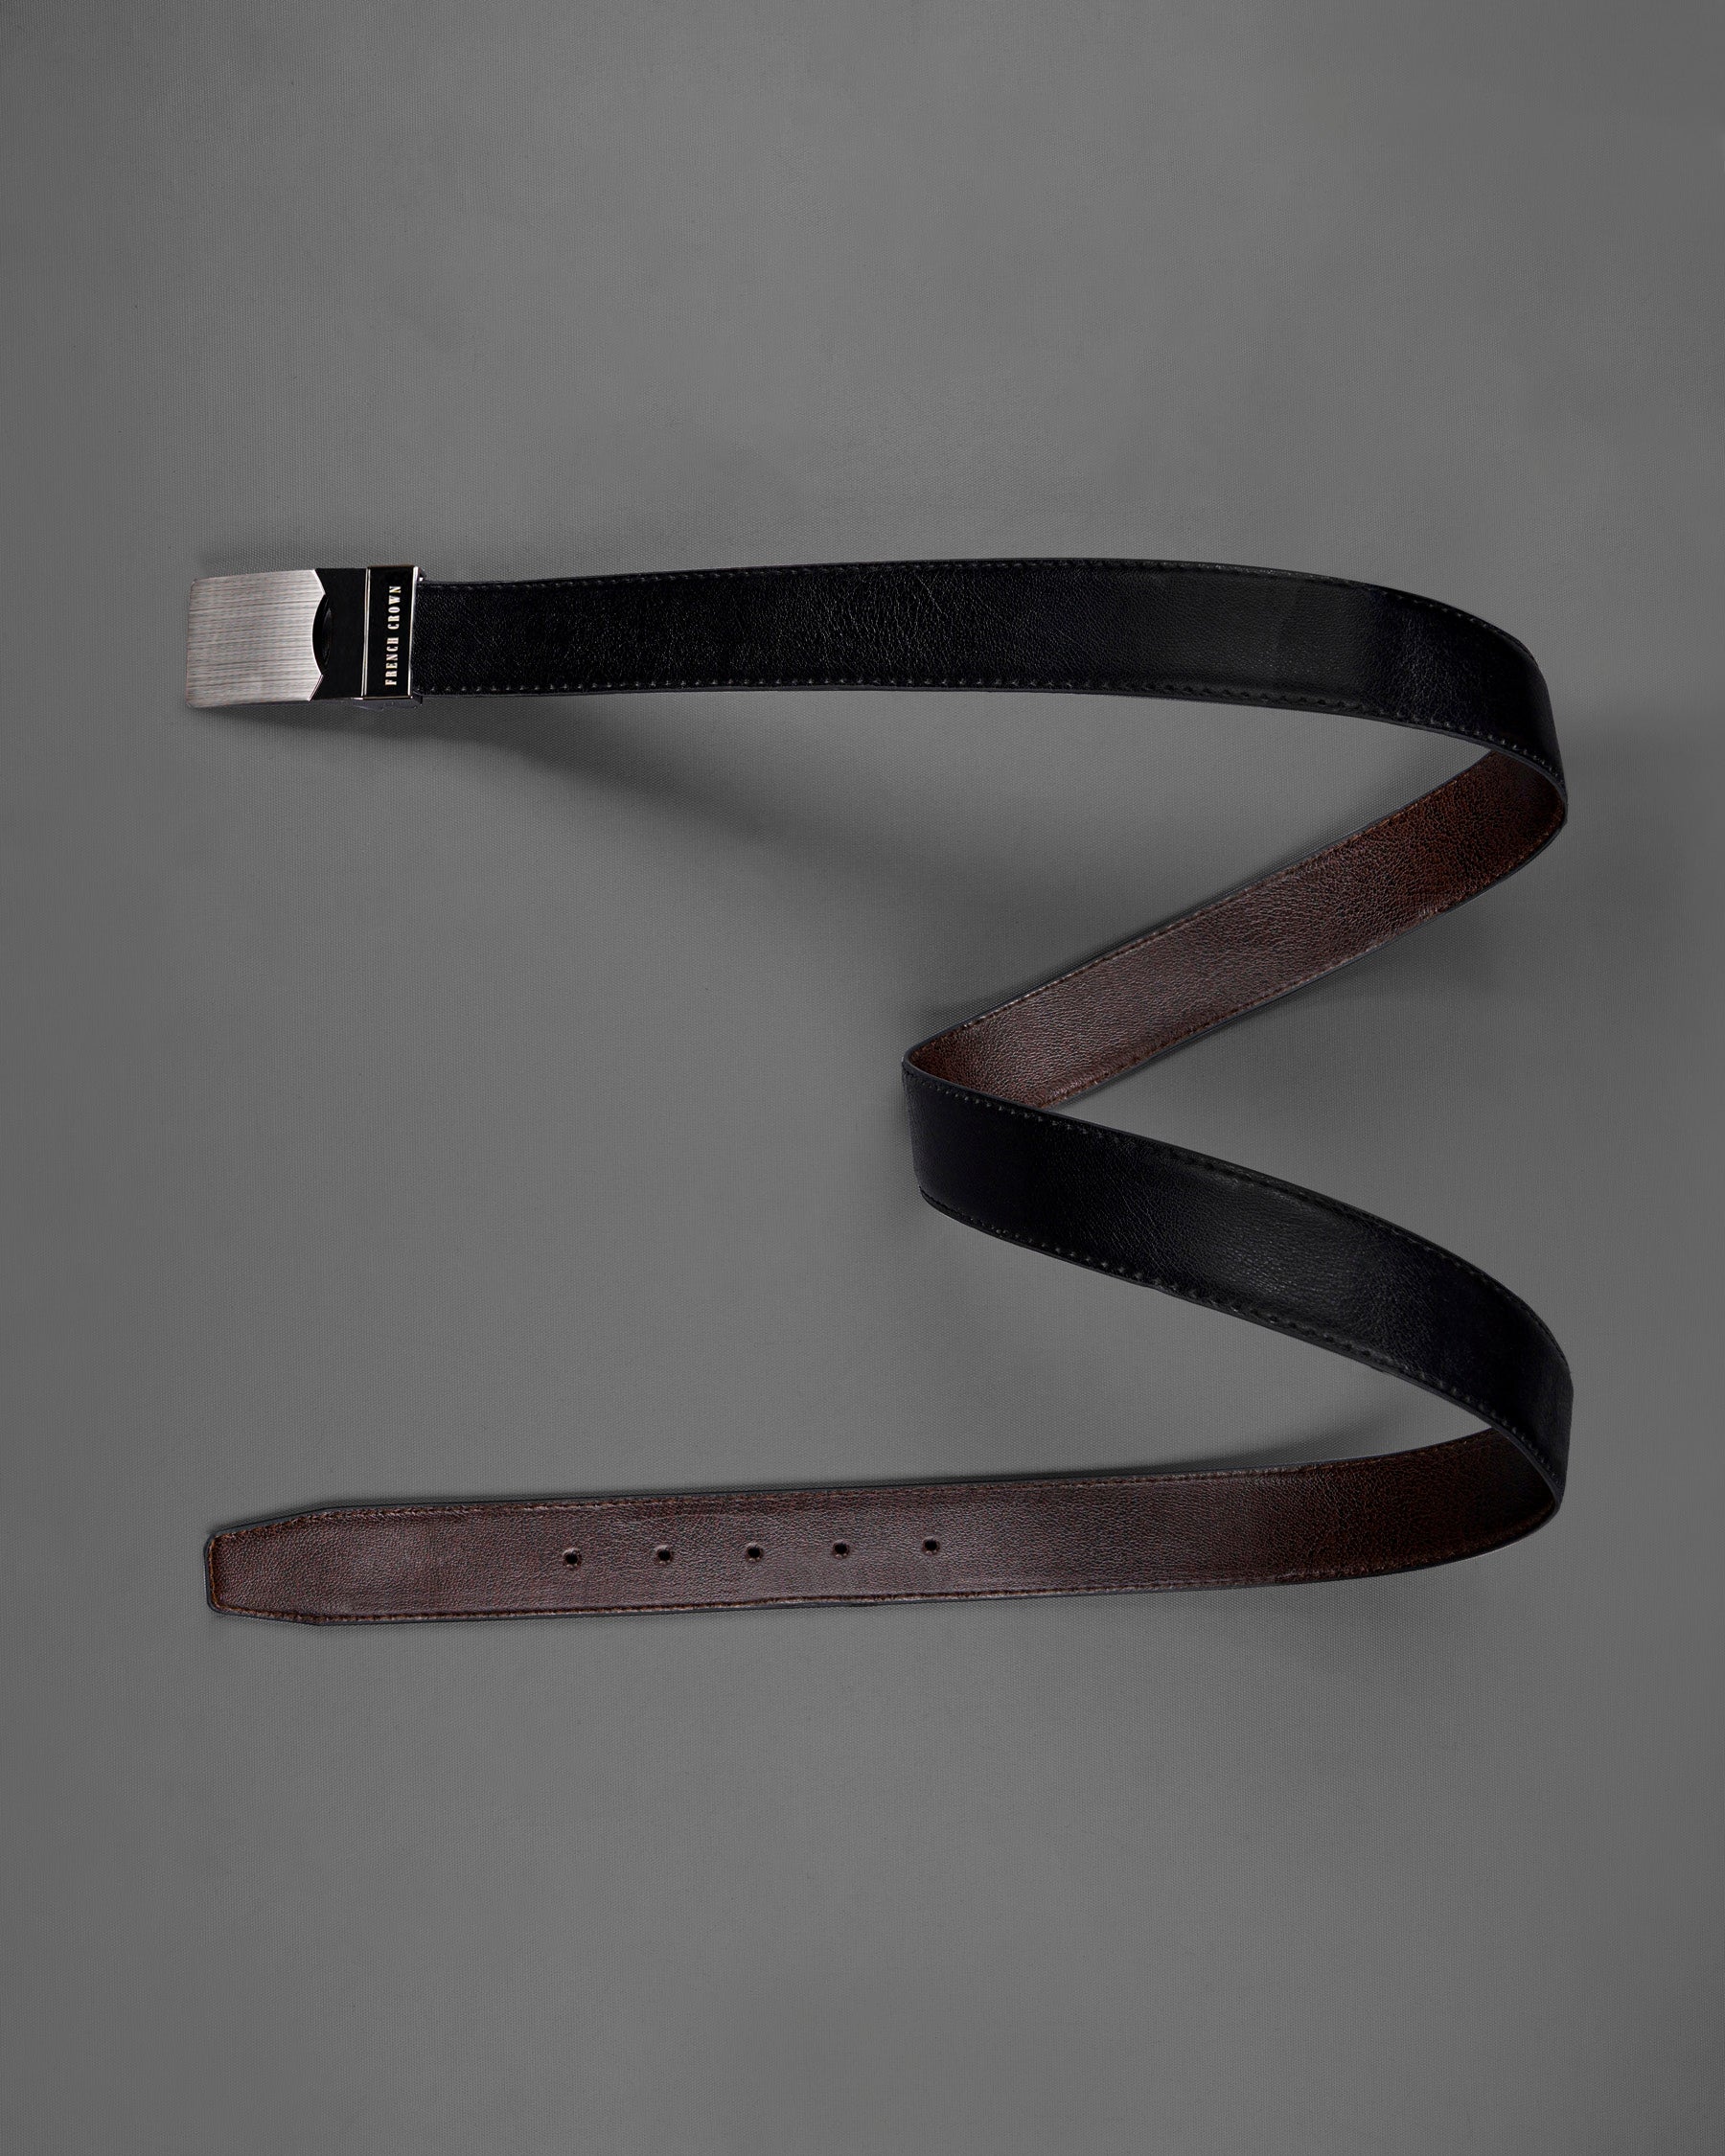 Golden and Black Box Buckle with Jade Black and Brown Leather Free Handcrafted Reversible Belt BT065-28, BT065-30, BT065-32, BT065-34, BT065-36, BT065-38